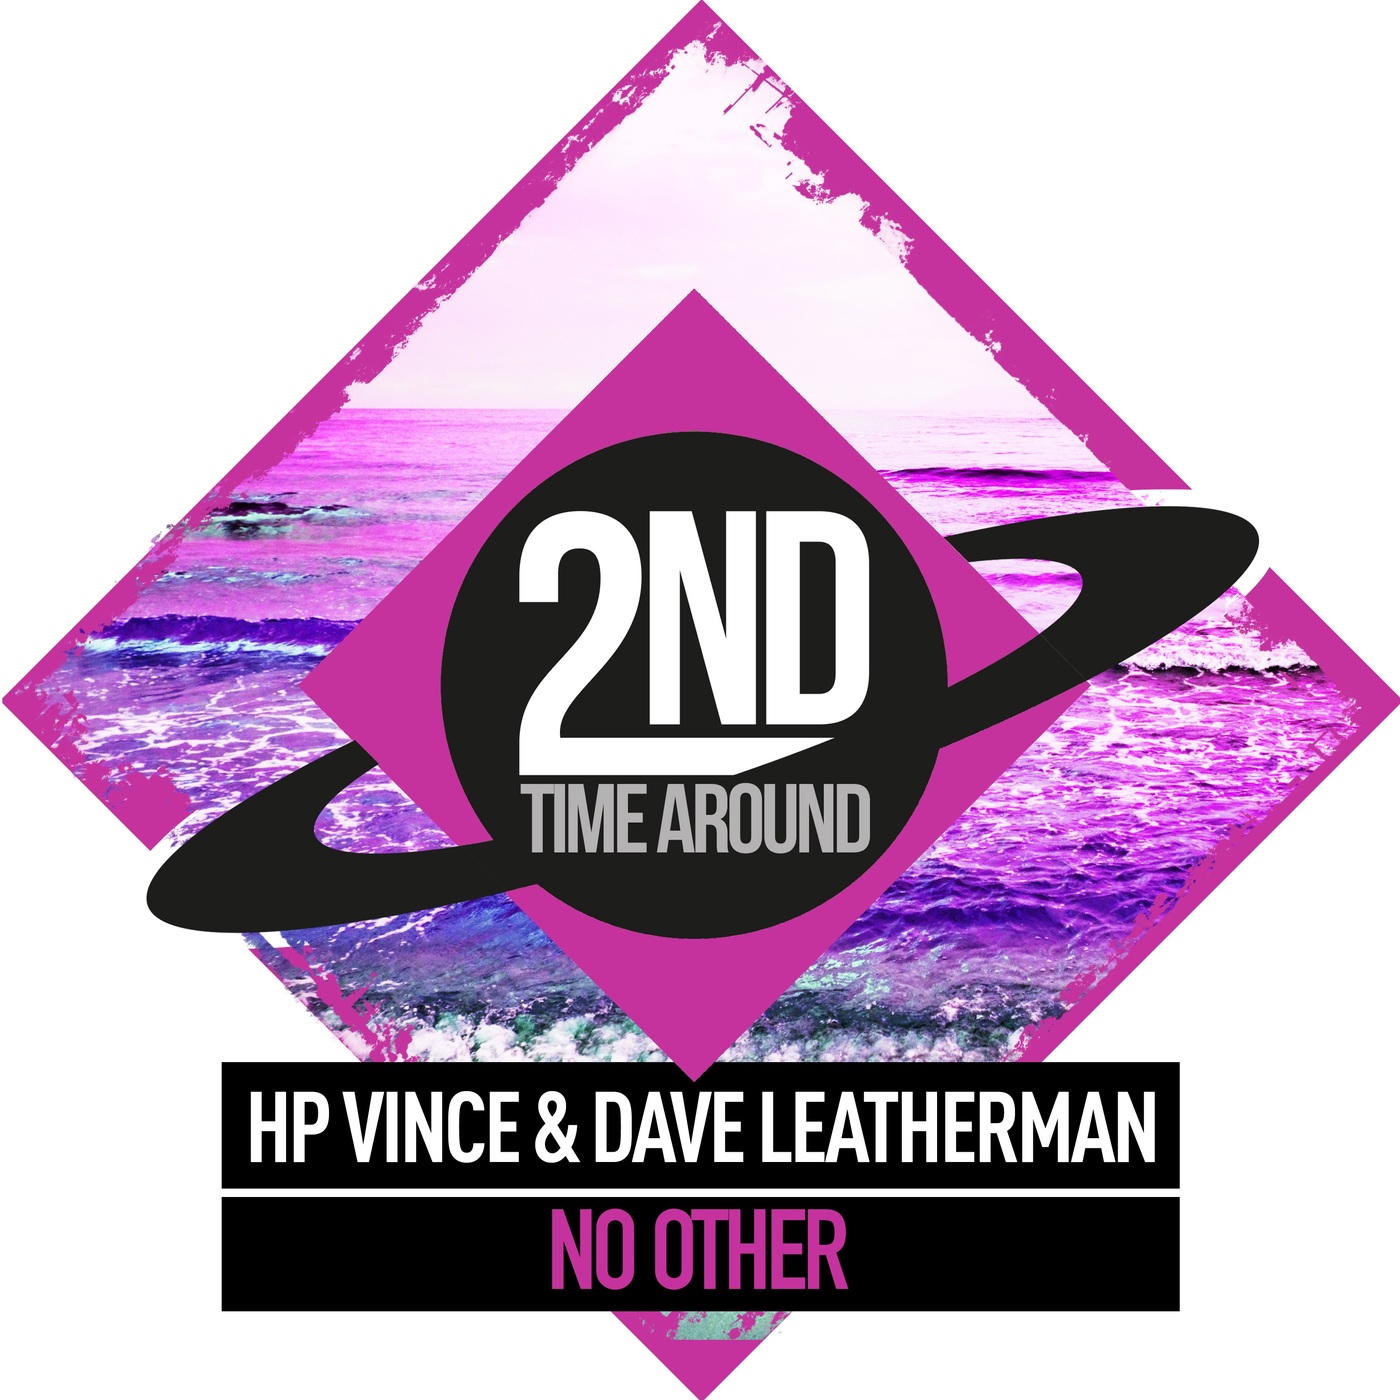 HP Vince & Dave Leatherman - No Other / 2nd Time Around